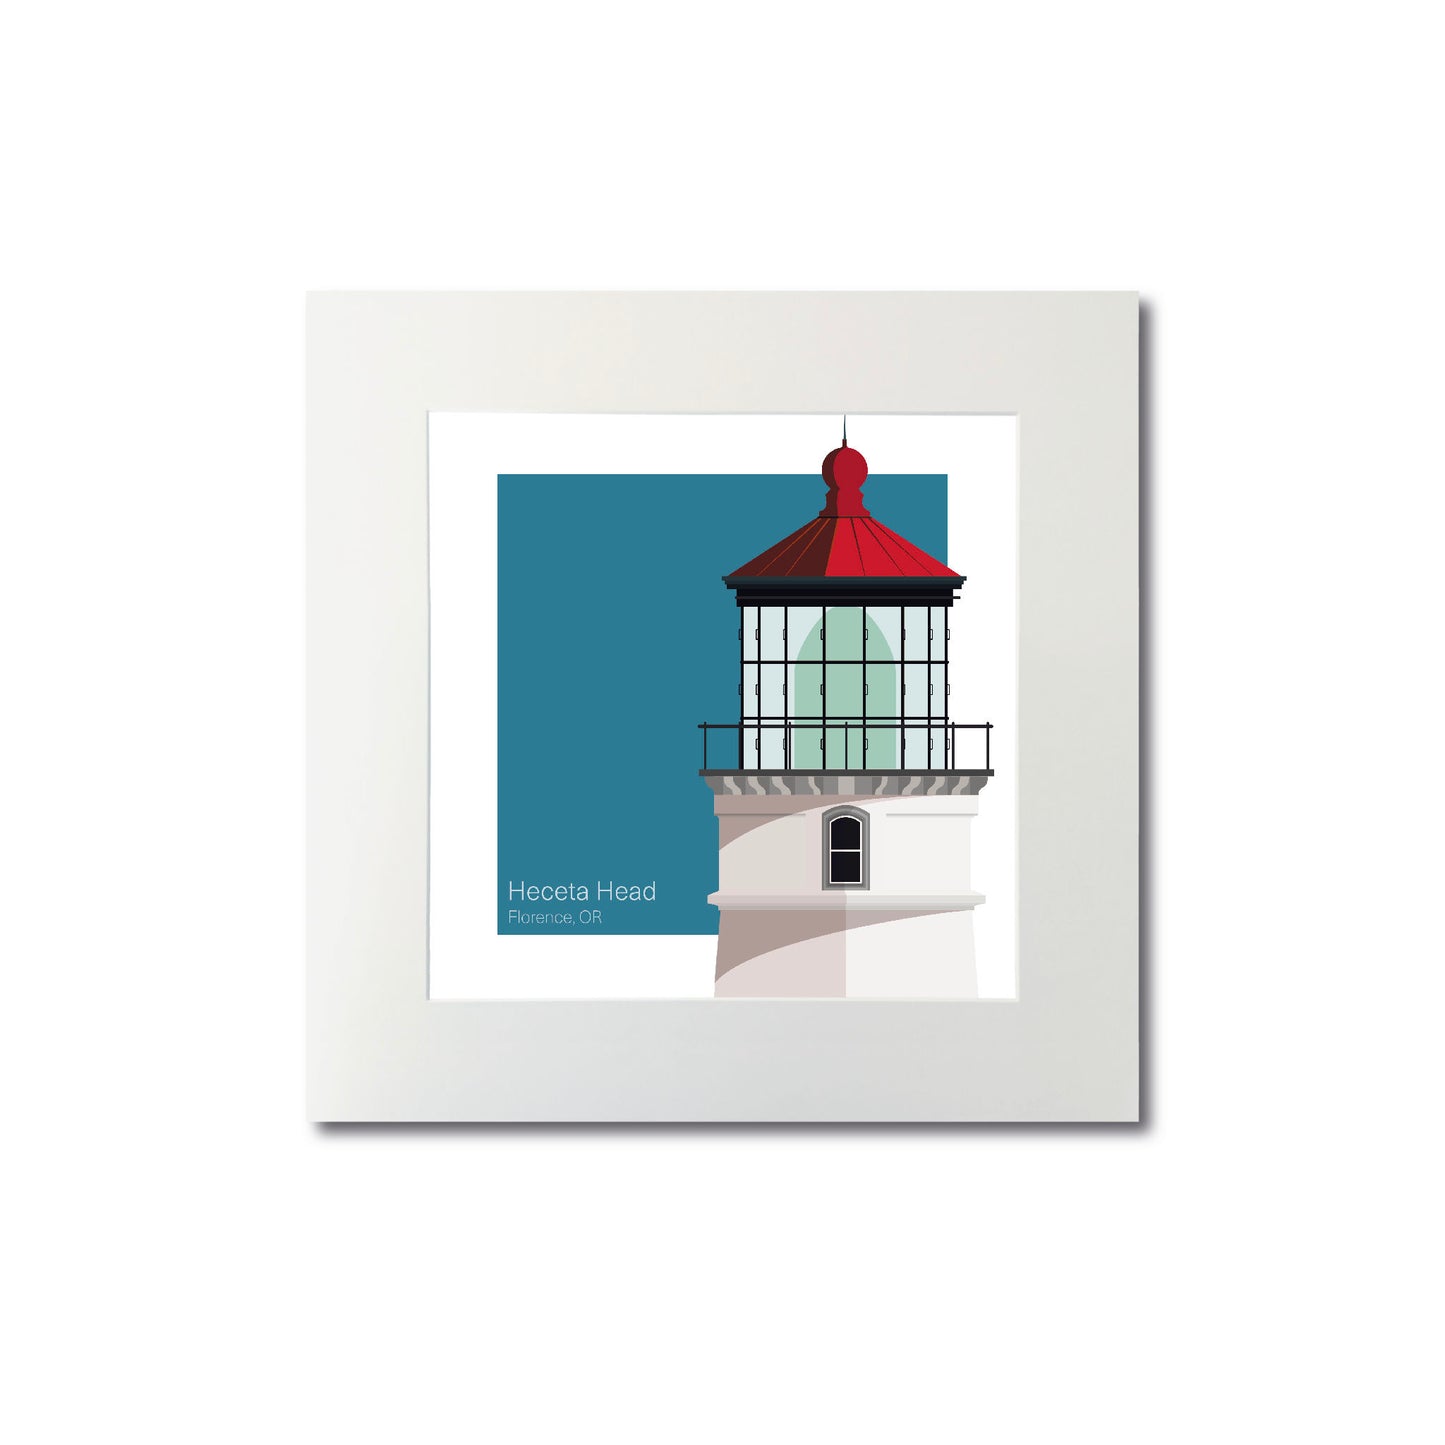 Illustration of the Heceta Head lighthouse, OR, USA. On a white background with aqua blue square as a backdrop., mounted and measuring 8"x8" (20x20cm).